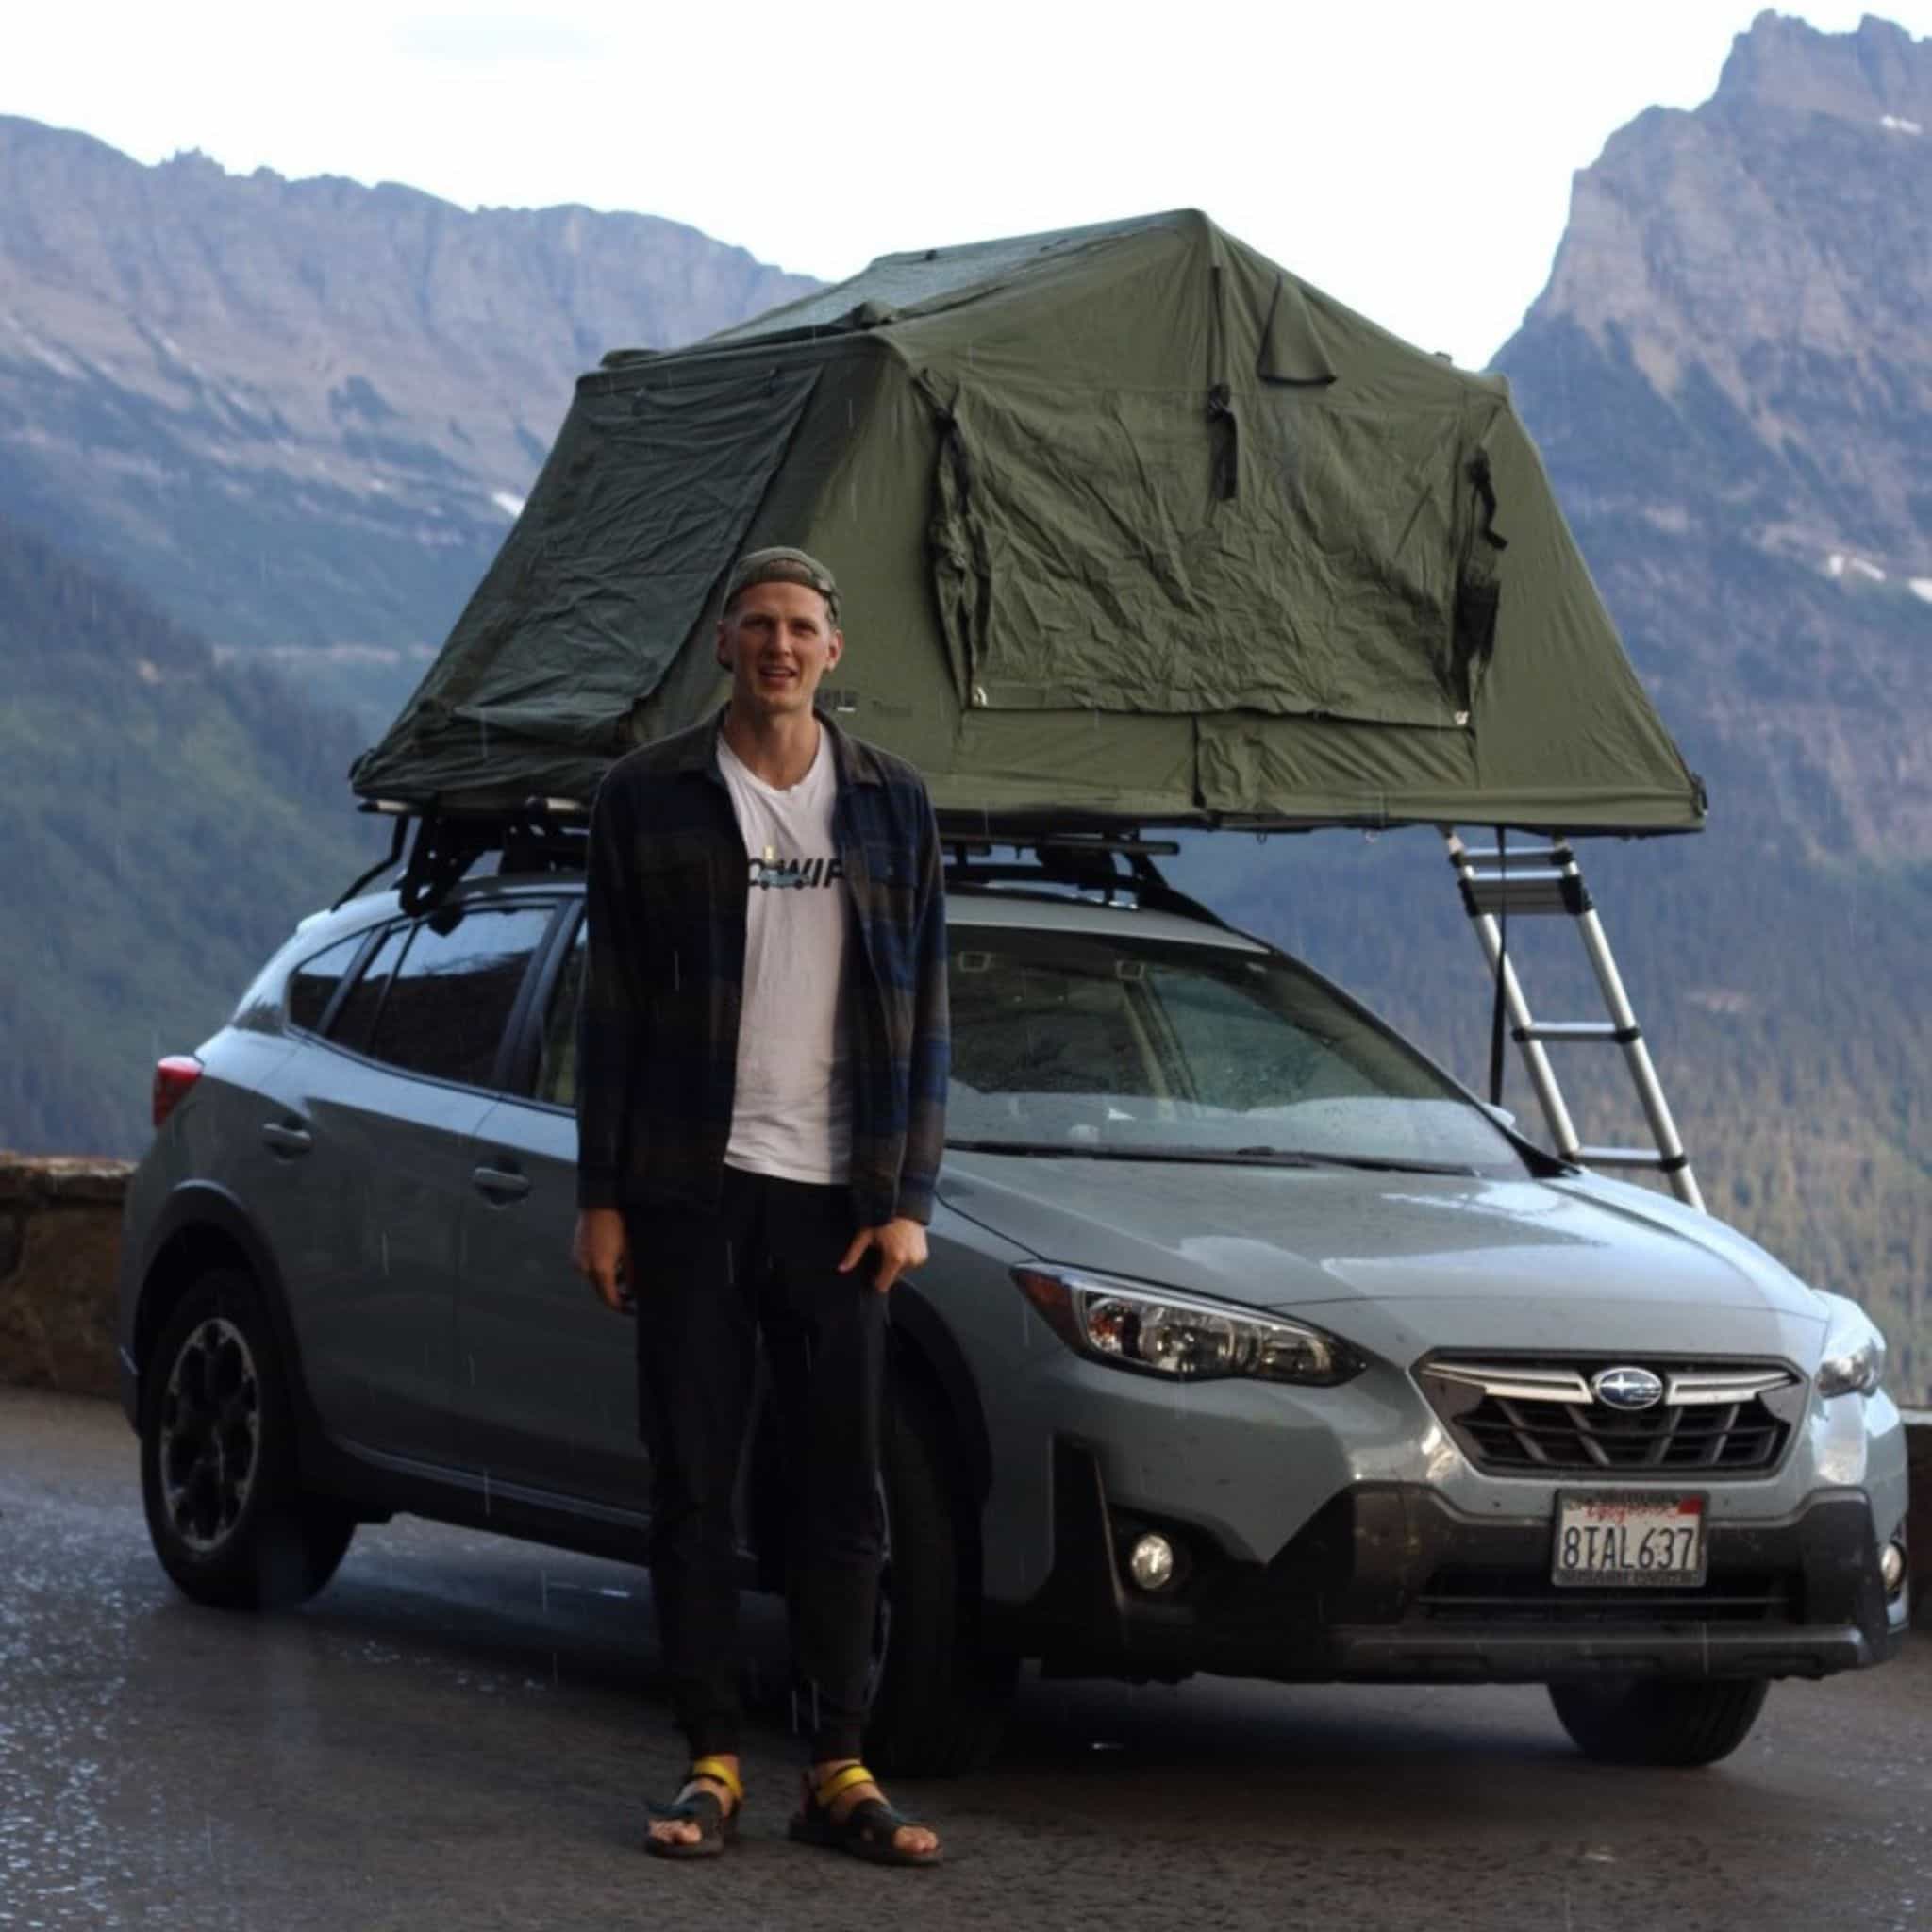 James Shaw and his rooftop tent